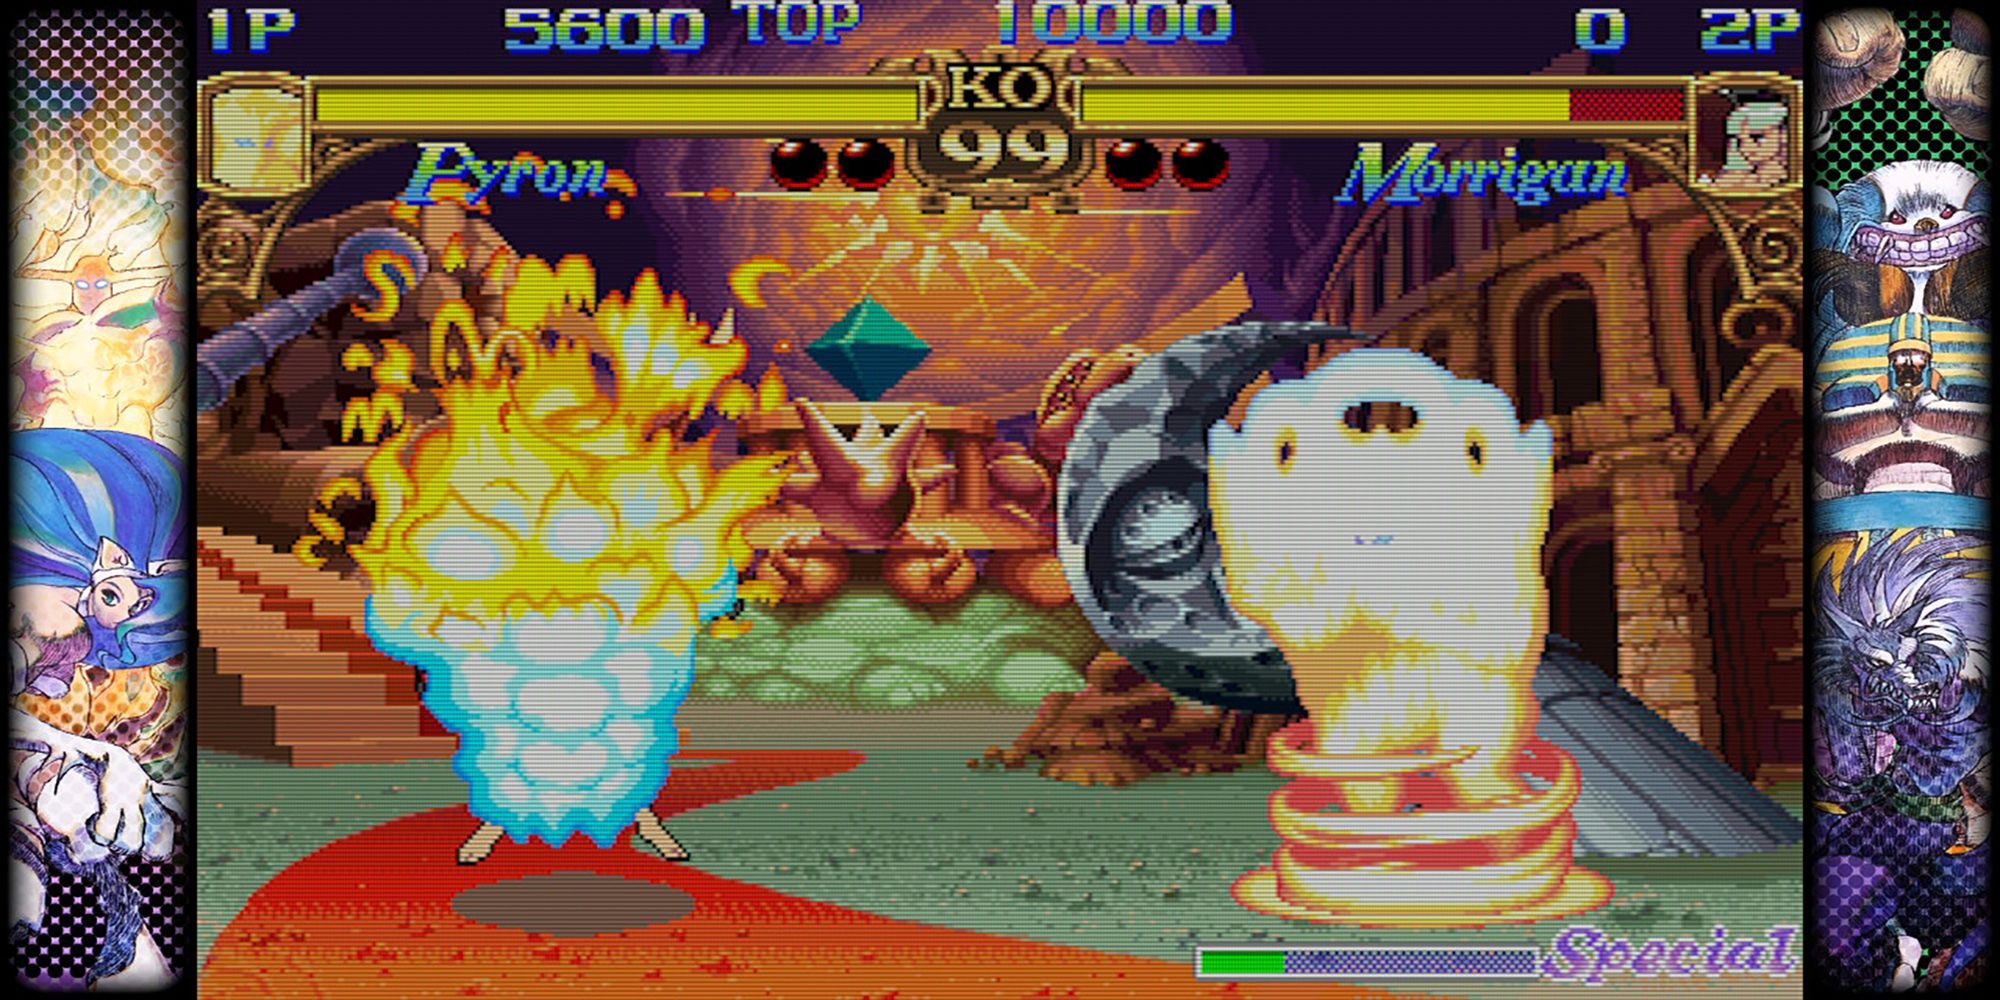 Pyron ignites Morrigan in flames during a heated battle in Hellstorm in Darkstalkers, a game in Capcom Fighting Collection.